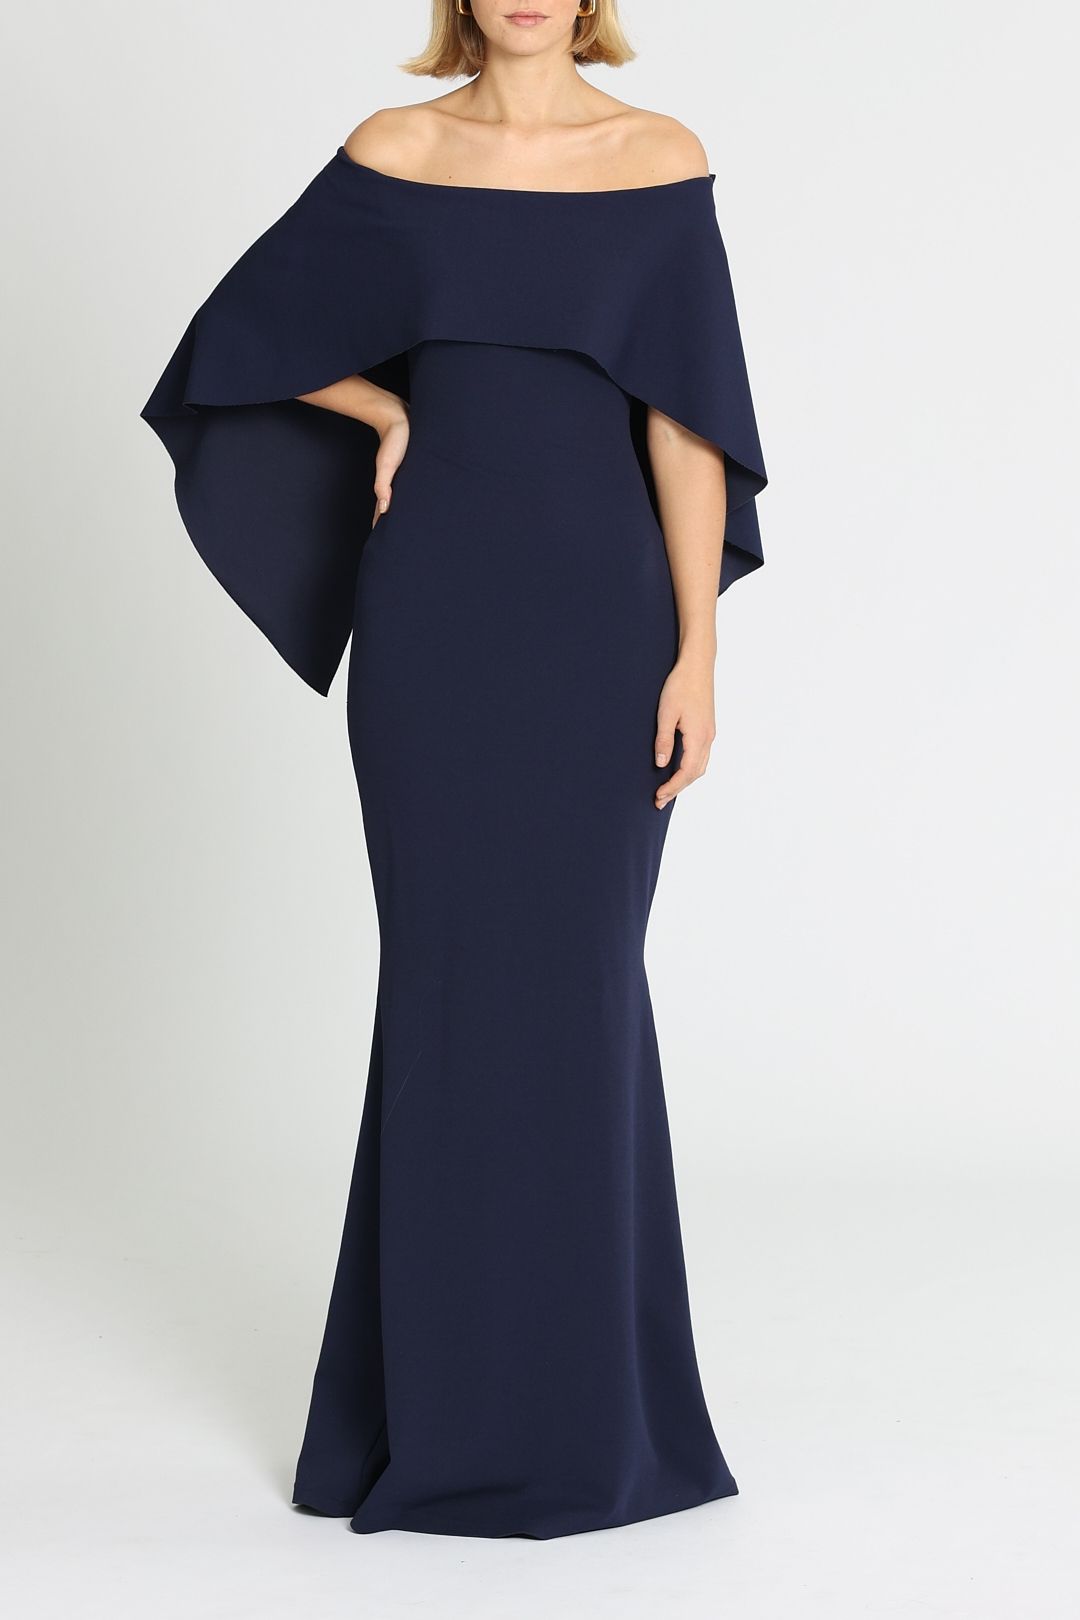 Composure Gown in Anchor by Pasduchas for Hire